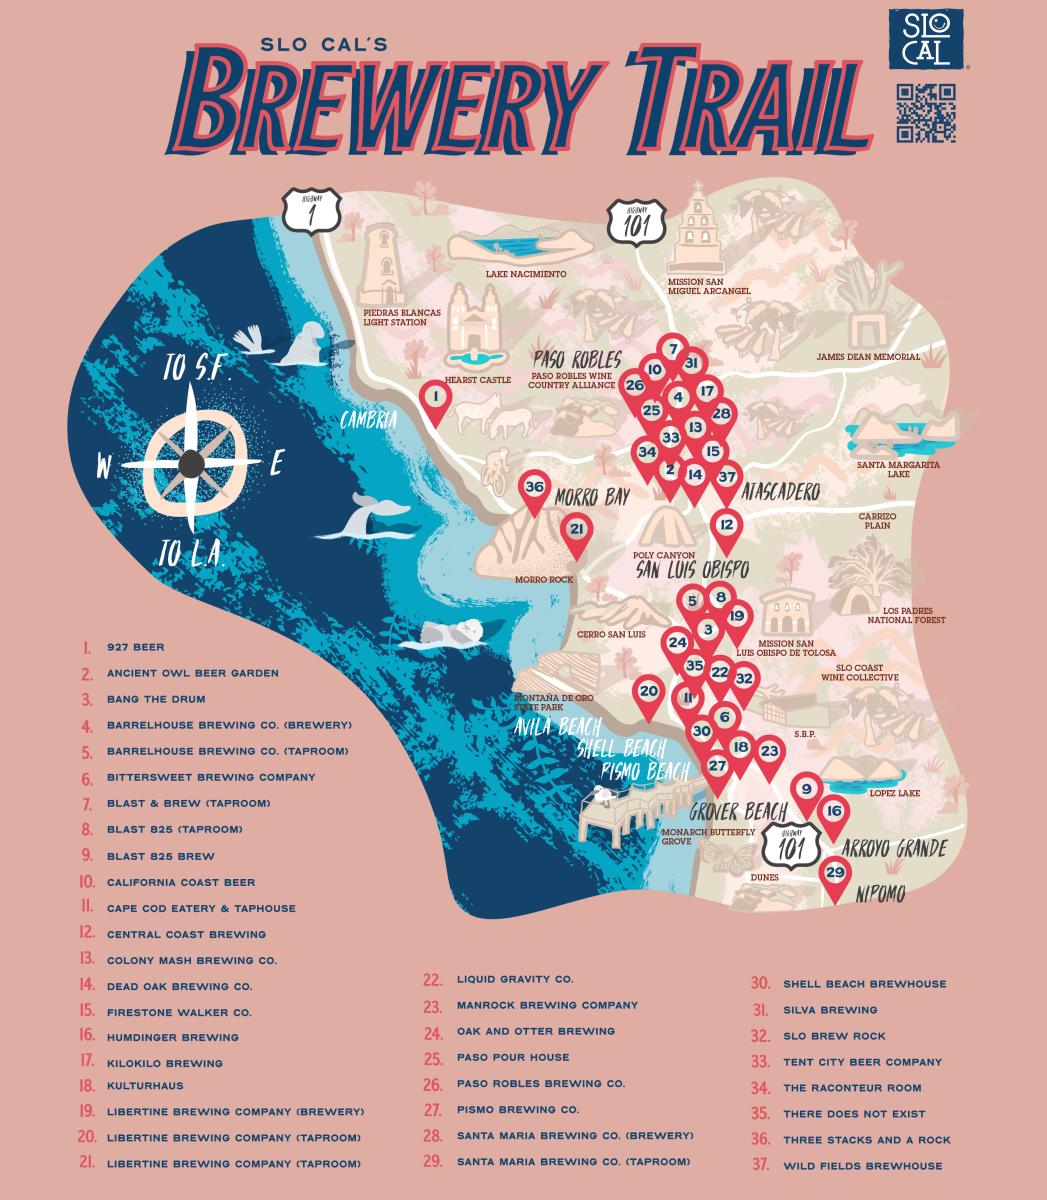 Brewery Trail